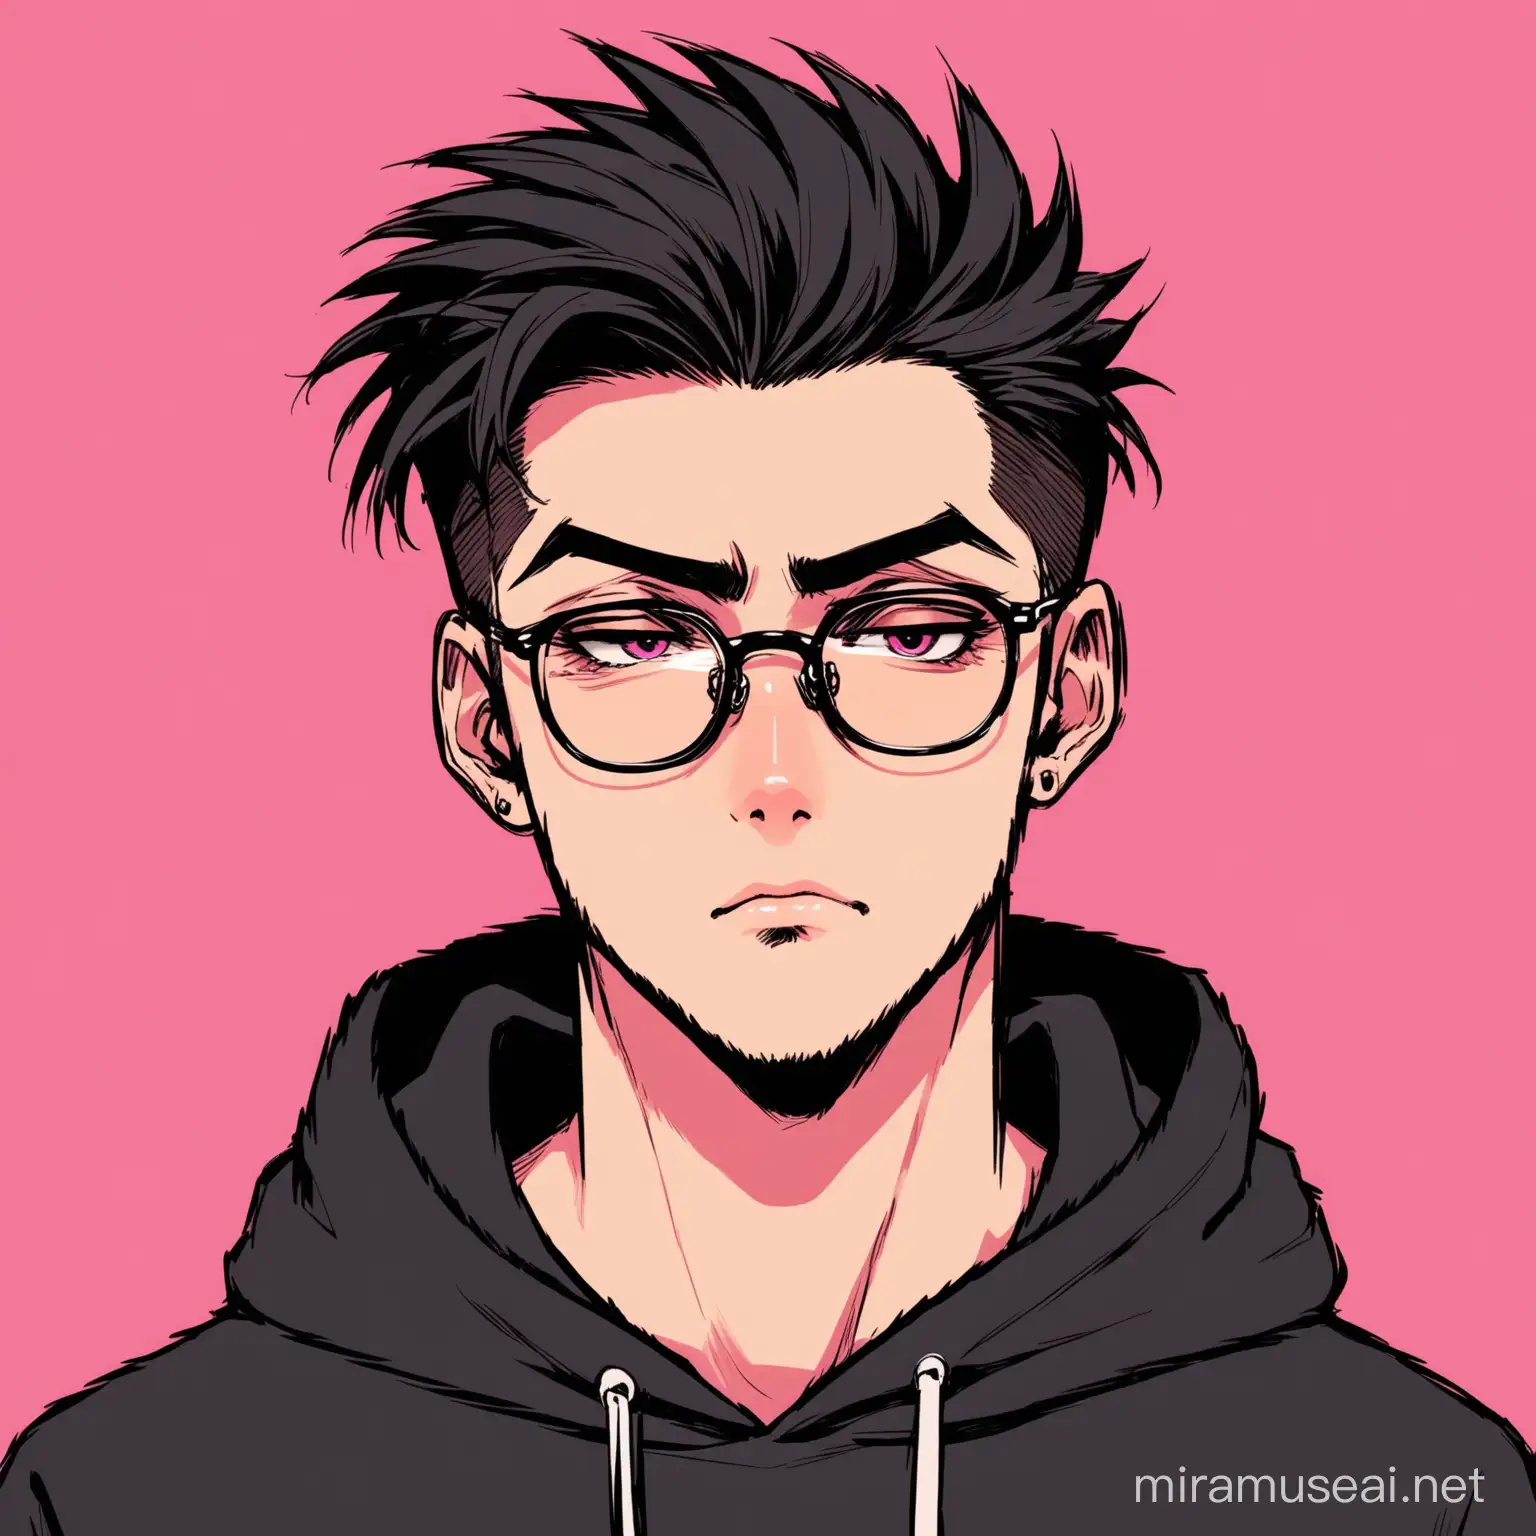 cool,hacker,black hoodie,glasses,quiff hairs,aesthetic,handome,aesthetic,psycho,oblong face,pink background,anchor beared
